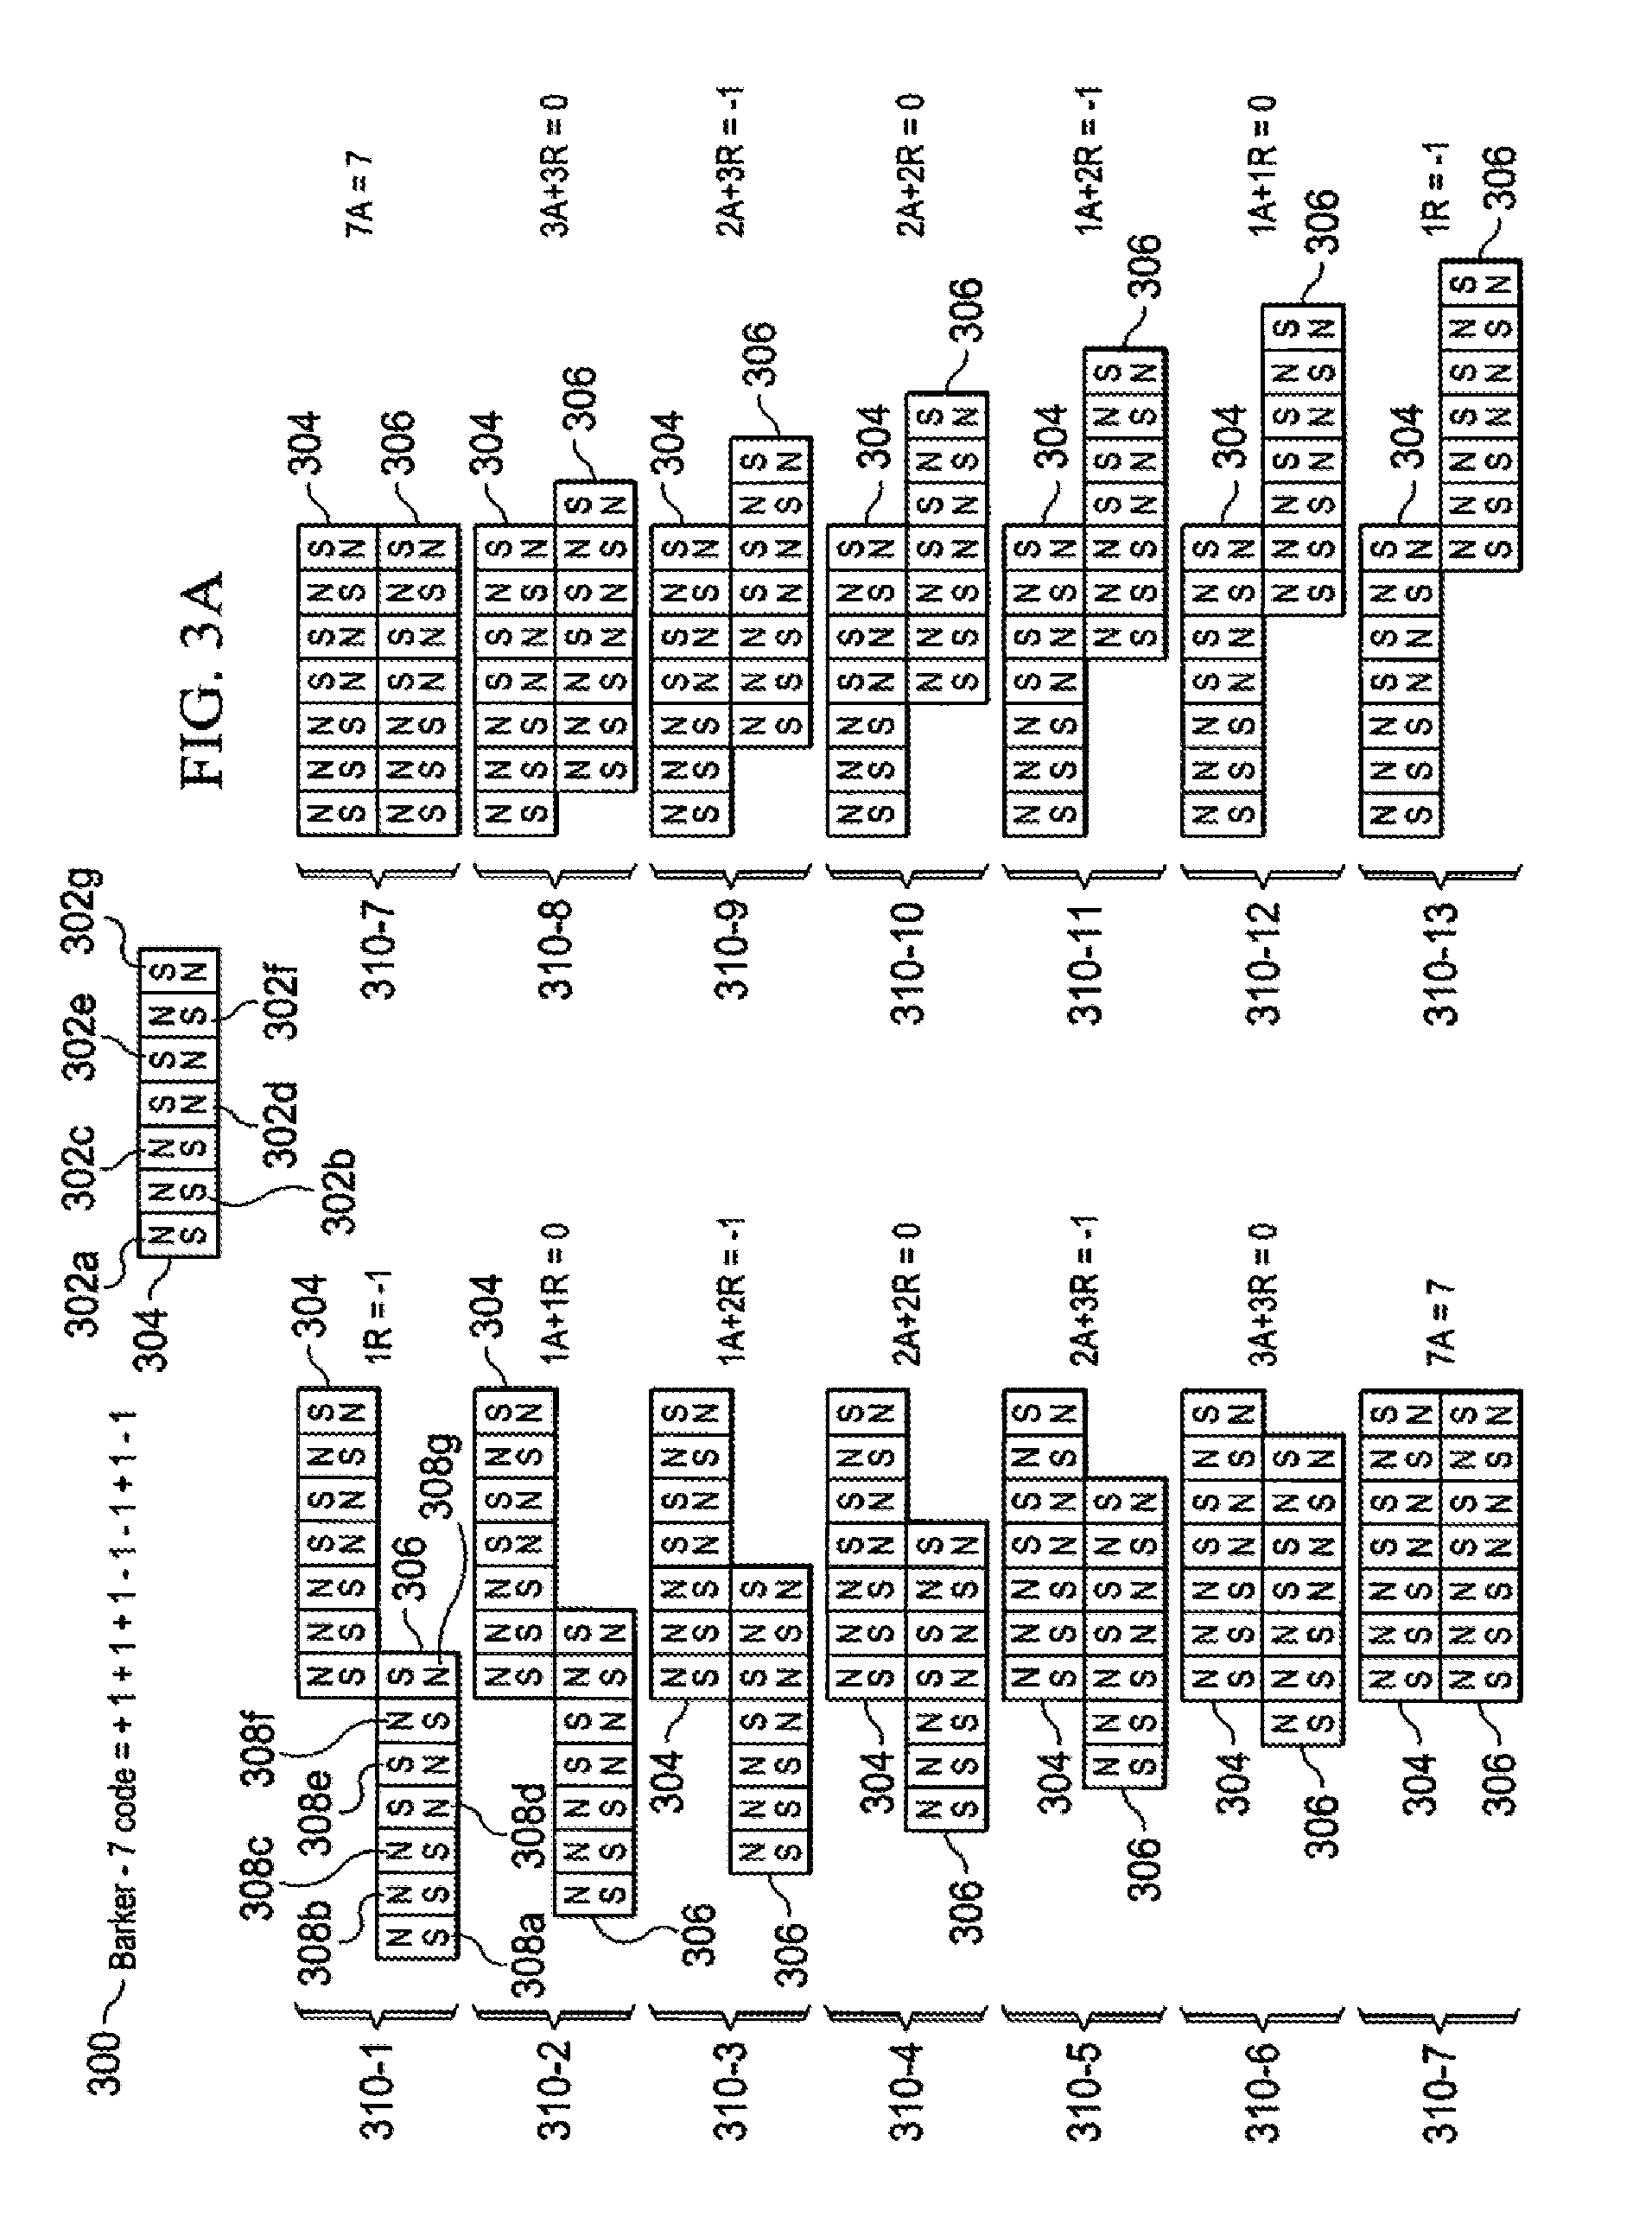 System and method for moving an object